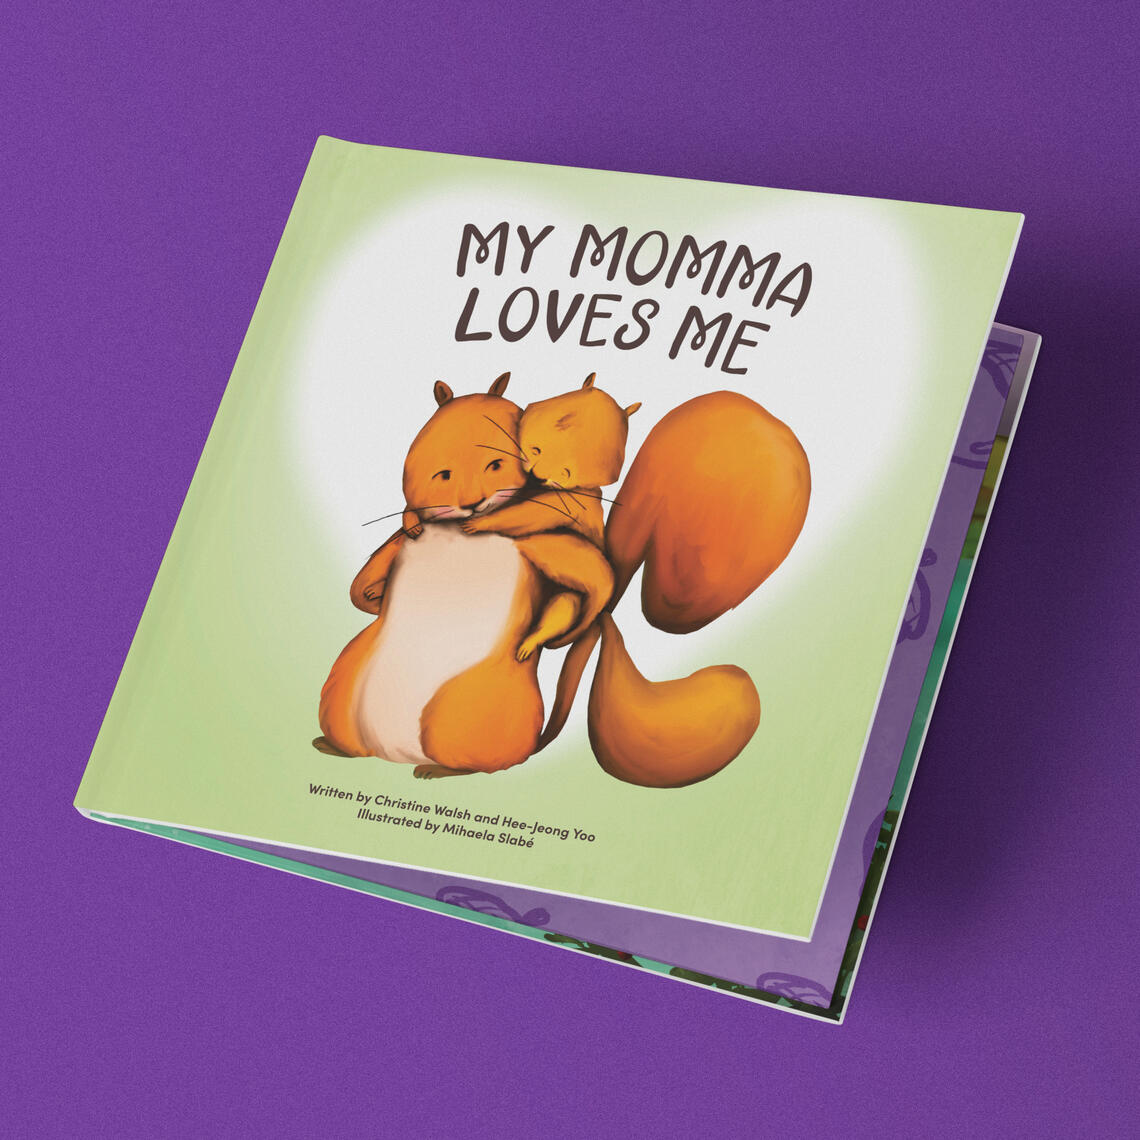 The front cover of My Momma Loves Me, which features two red squirrels embracing